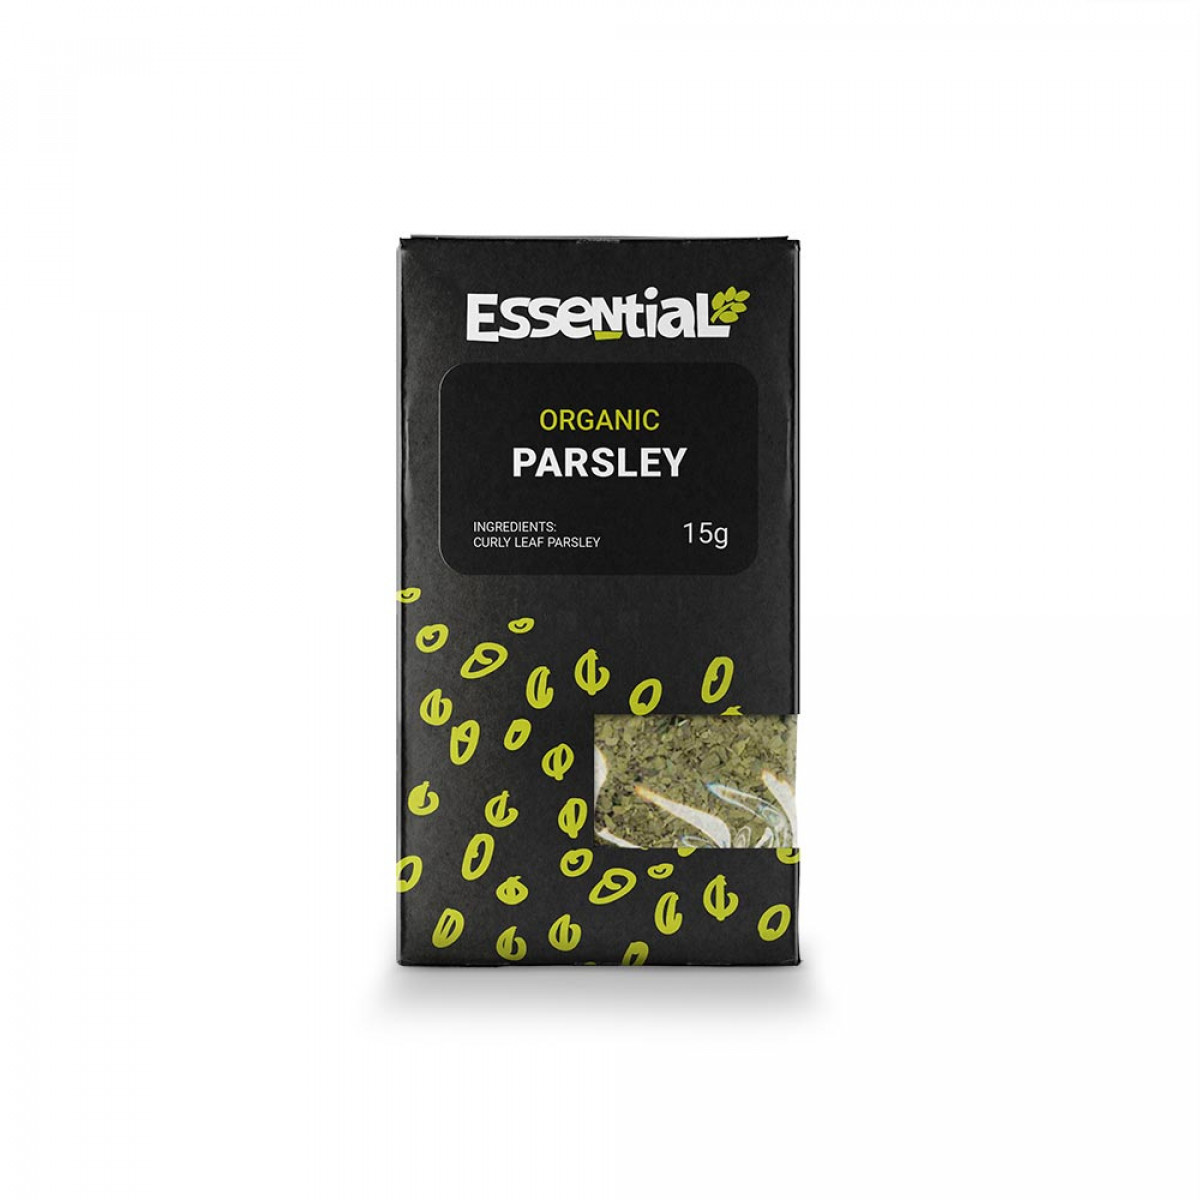 Product picture for Parsley